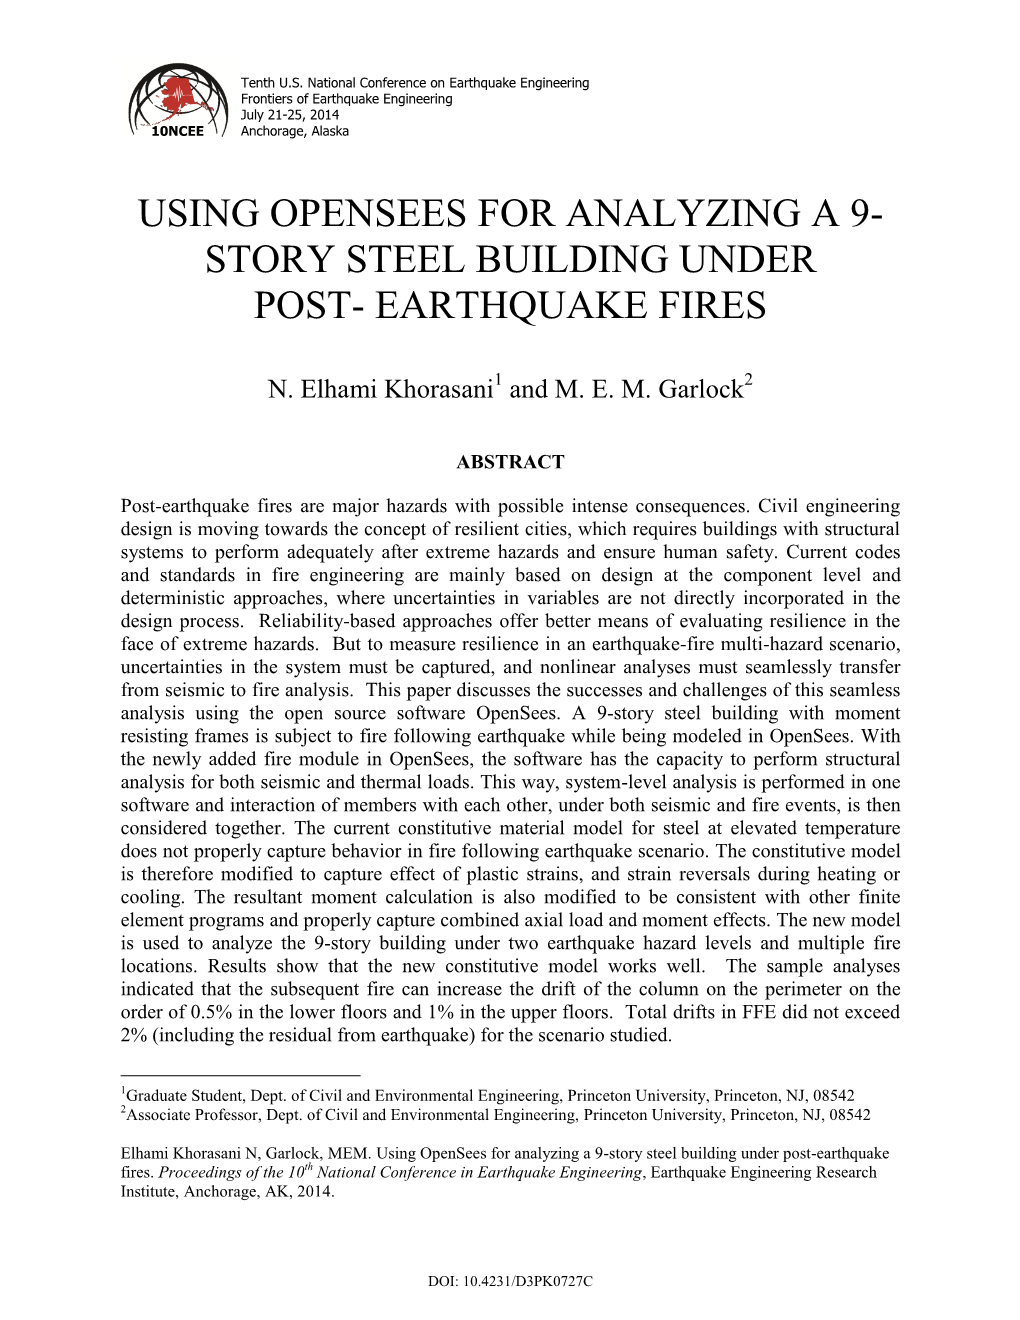 Using Opensees for Analyzing a 9- Story Steel Building Under Post- Earthquake Fires